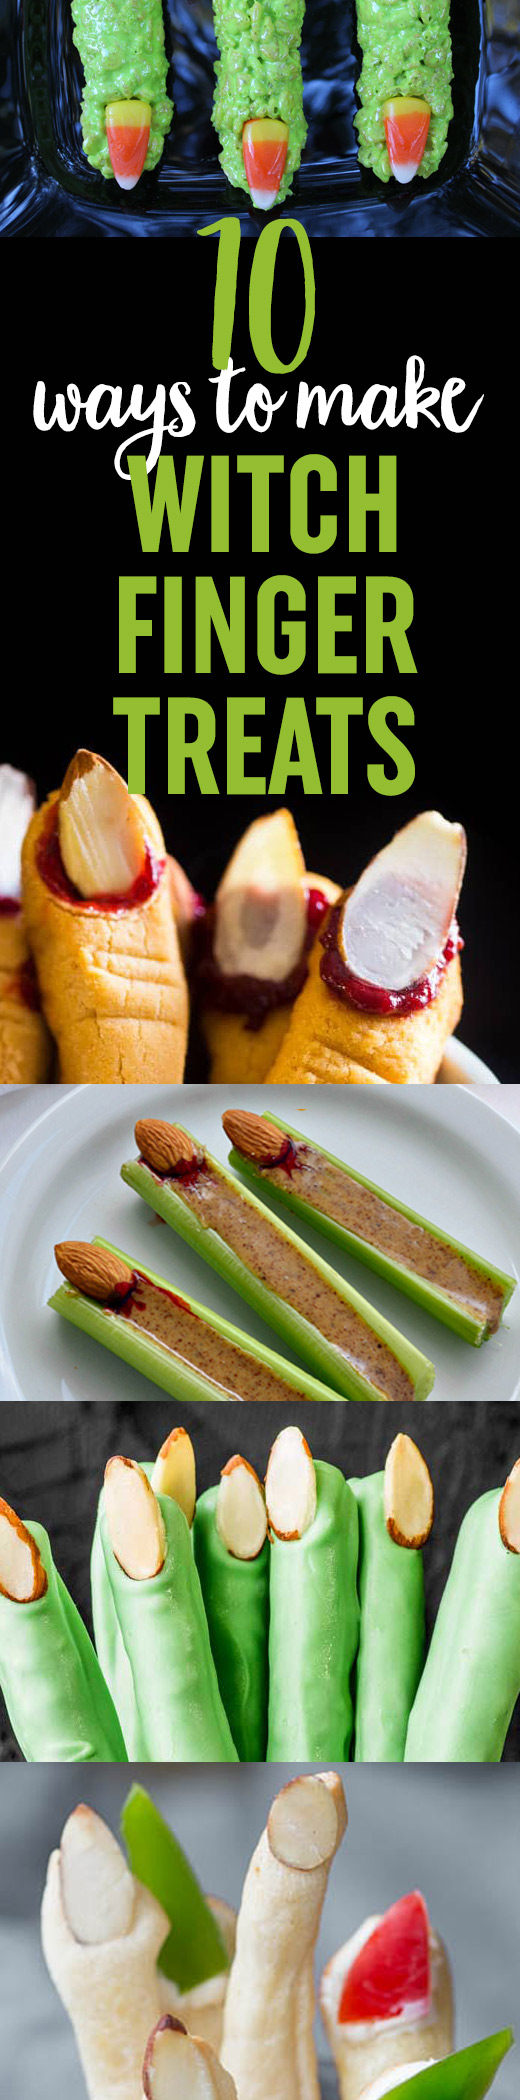 Come hither, my pretties! Here are 10 Witch Finger Snack Ideas - enough to count on both hands. Breadsticks, cookies, candy pretzels, and more. #witchesfingers #halloweensnacks #halloween